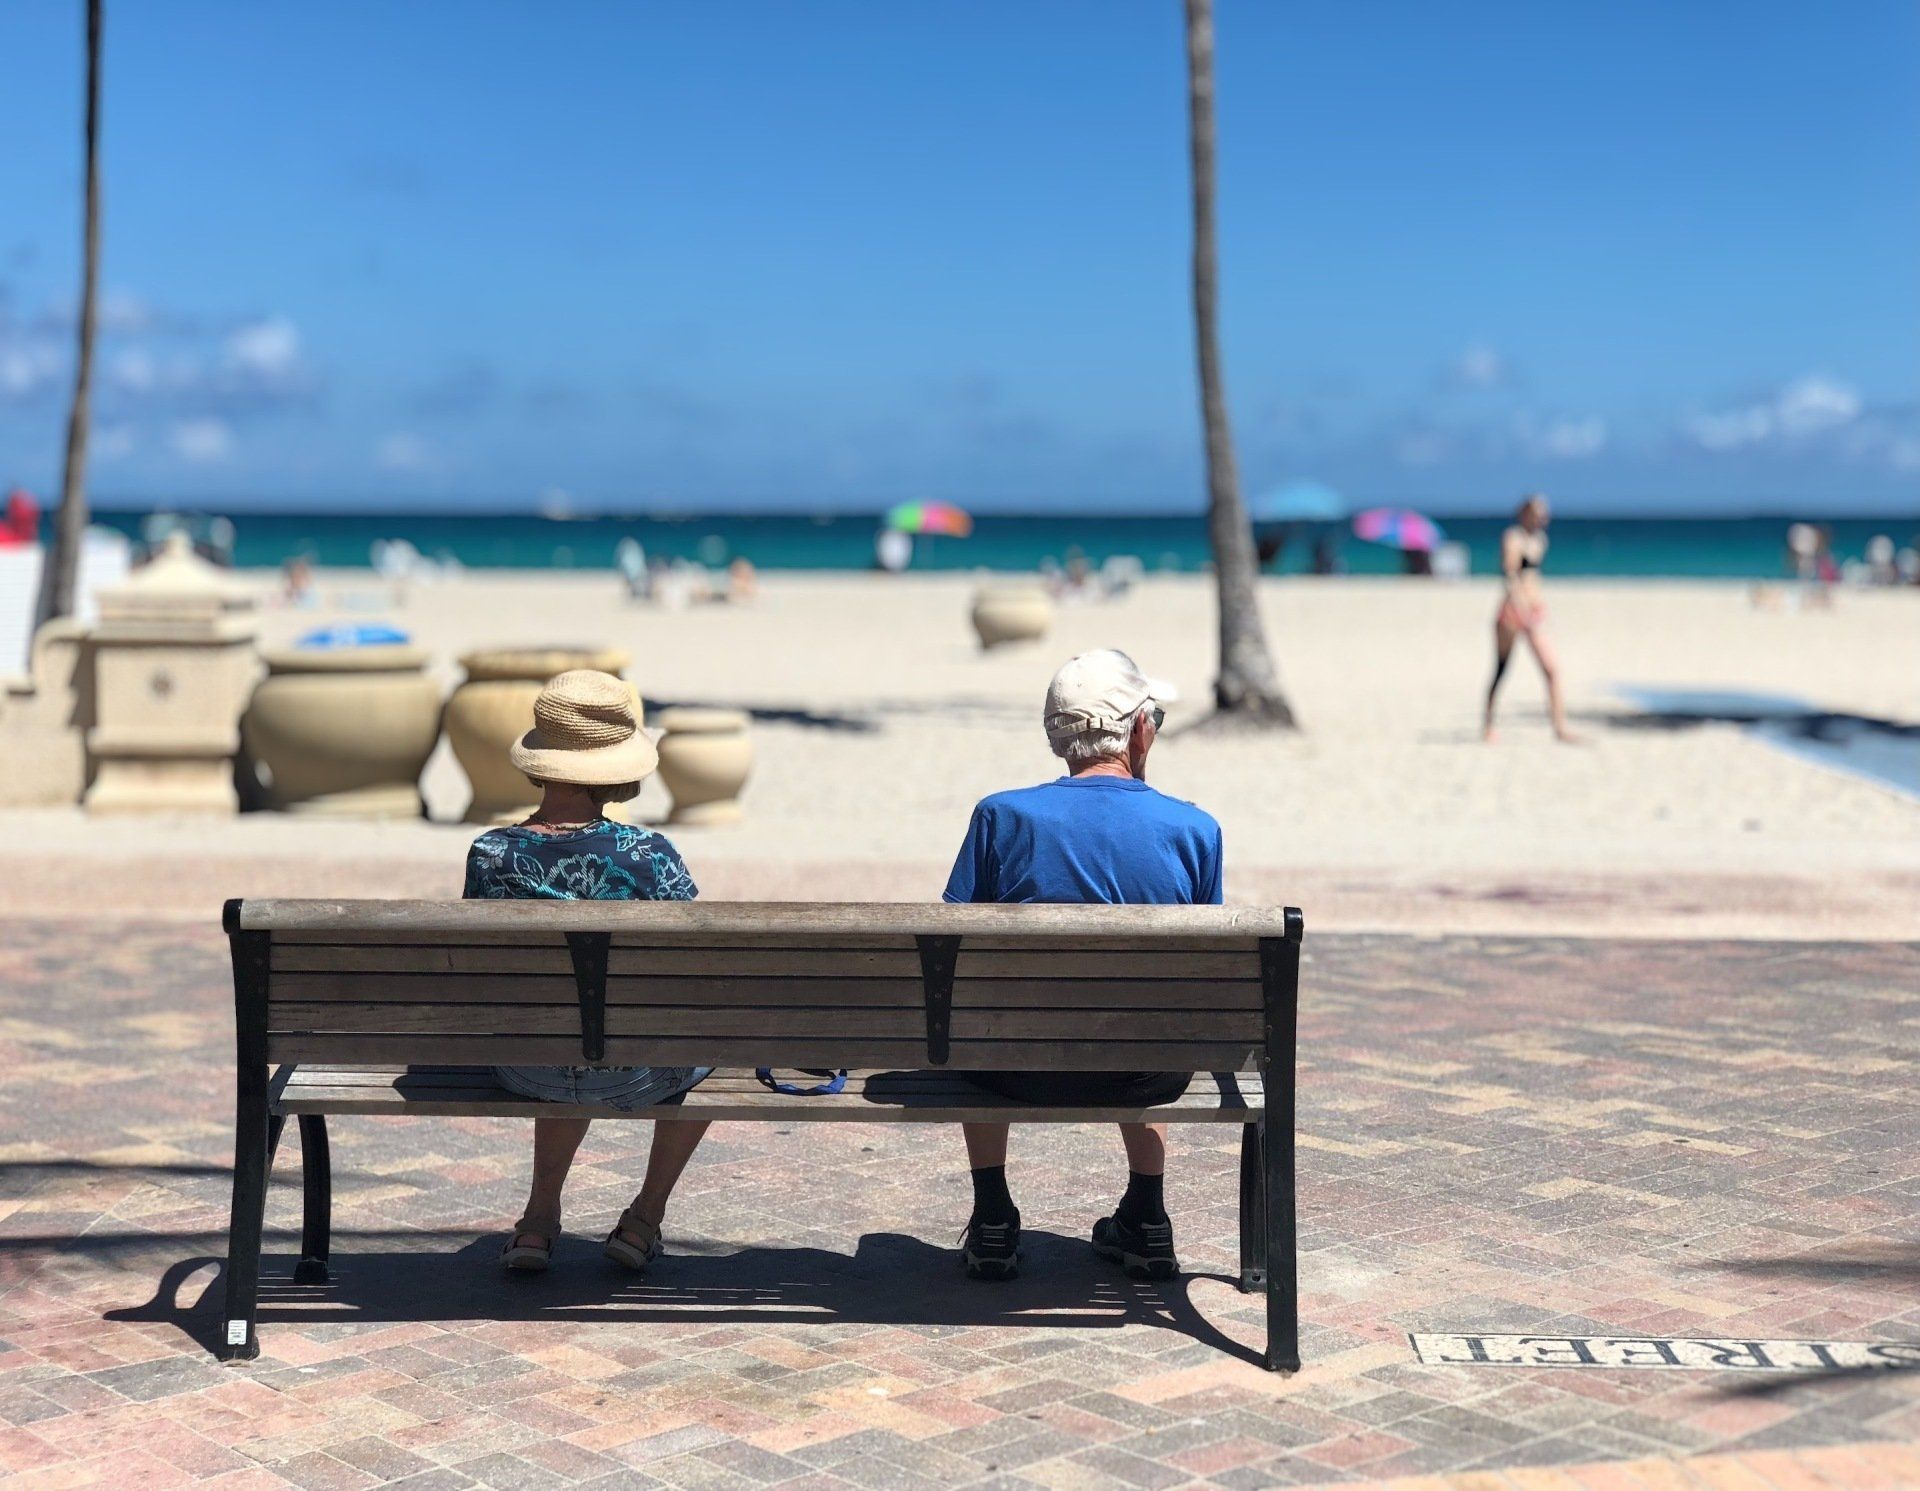 Two people are sitting on a bench looking at the beach.